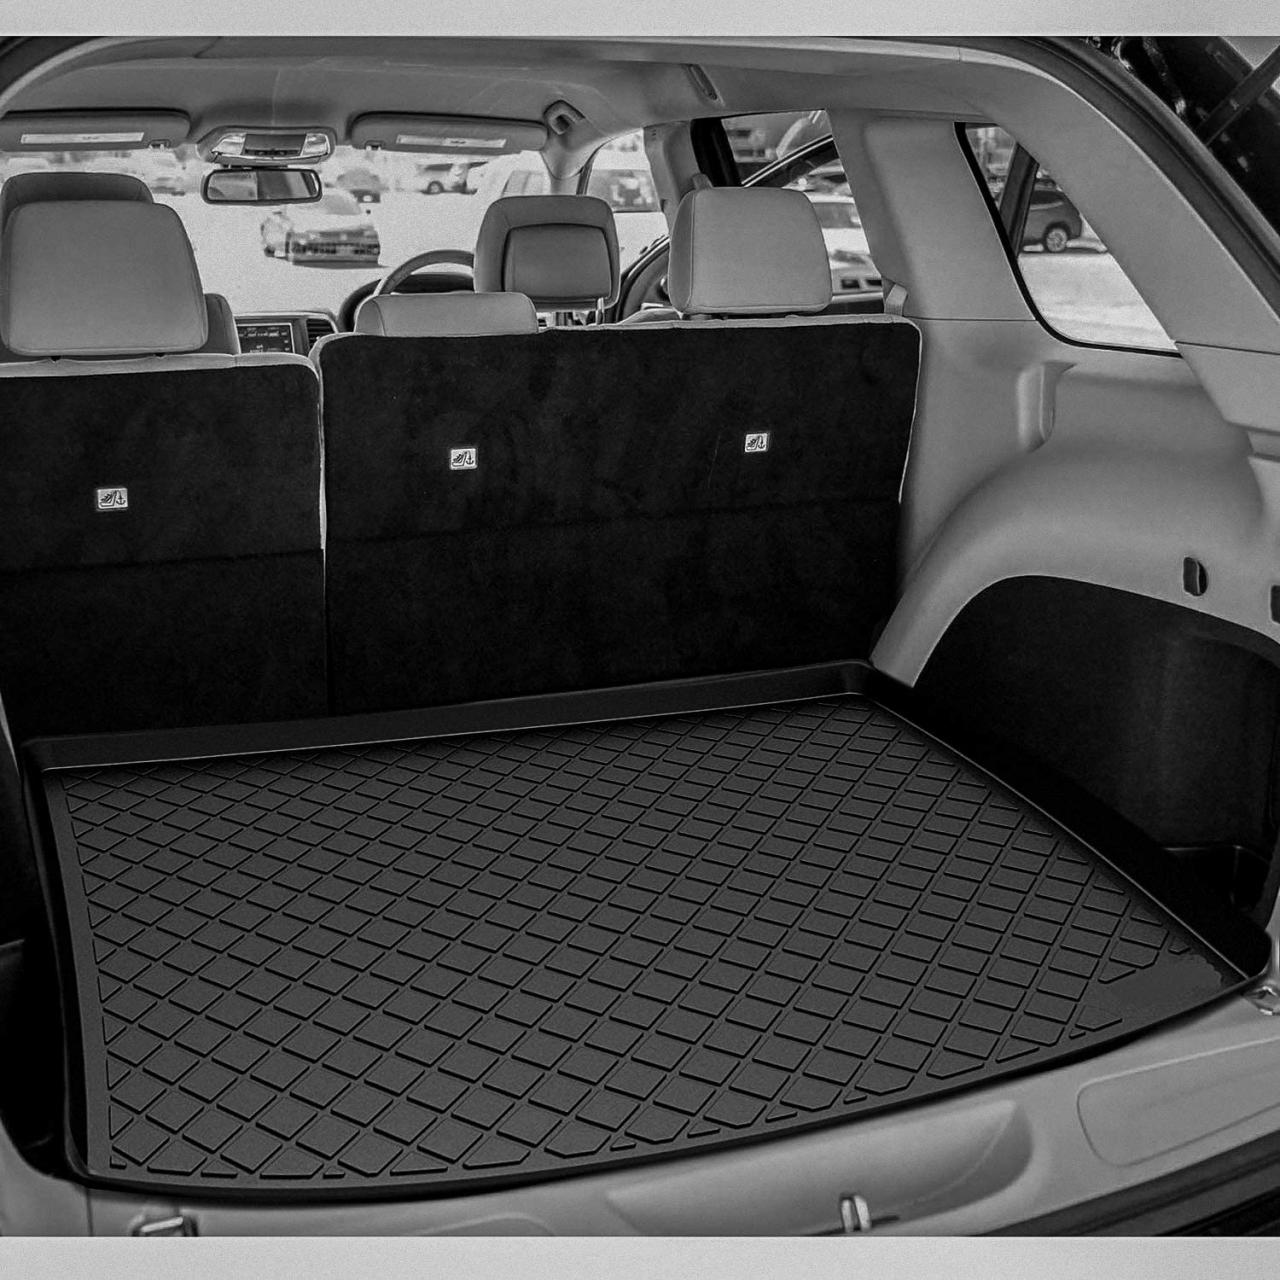 Buy CUMART Rear Trunk Cargo Mat Liner Waterproof Compatible with Ford  Escape 2013 2014 2015 2016 2017 2018 2019 2020 Custom Fit Black Online in  Turkey. B07ZVM1HVR